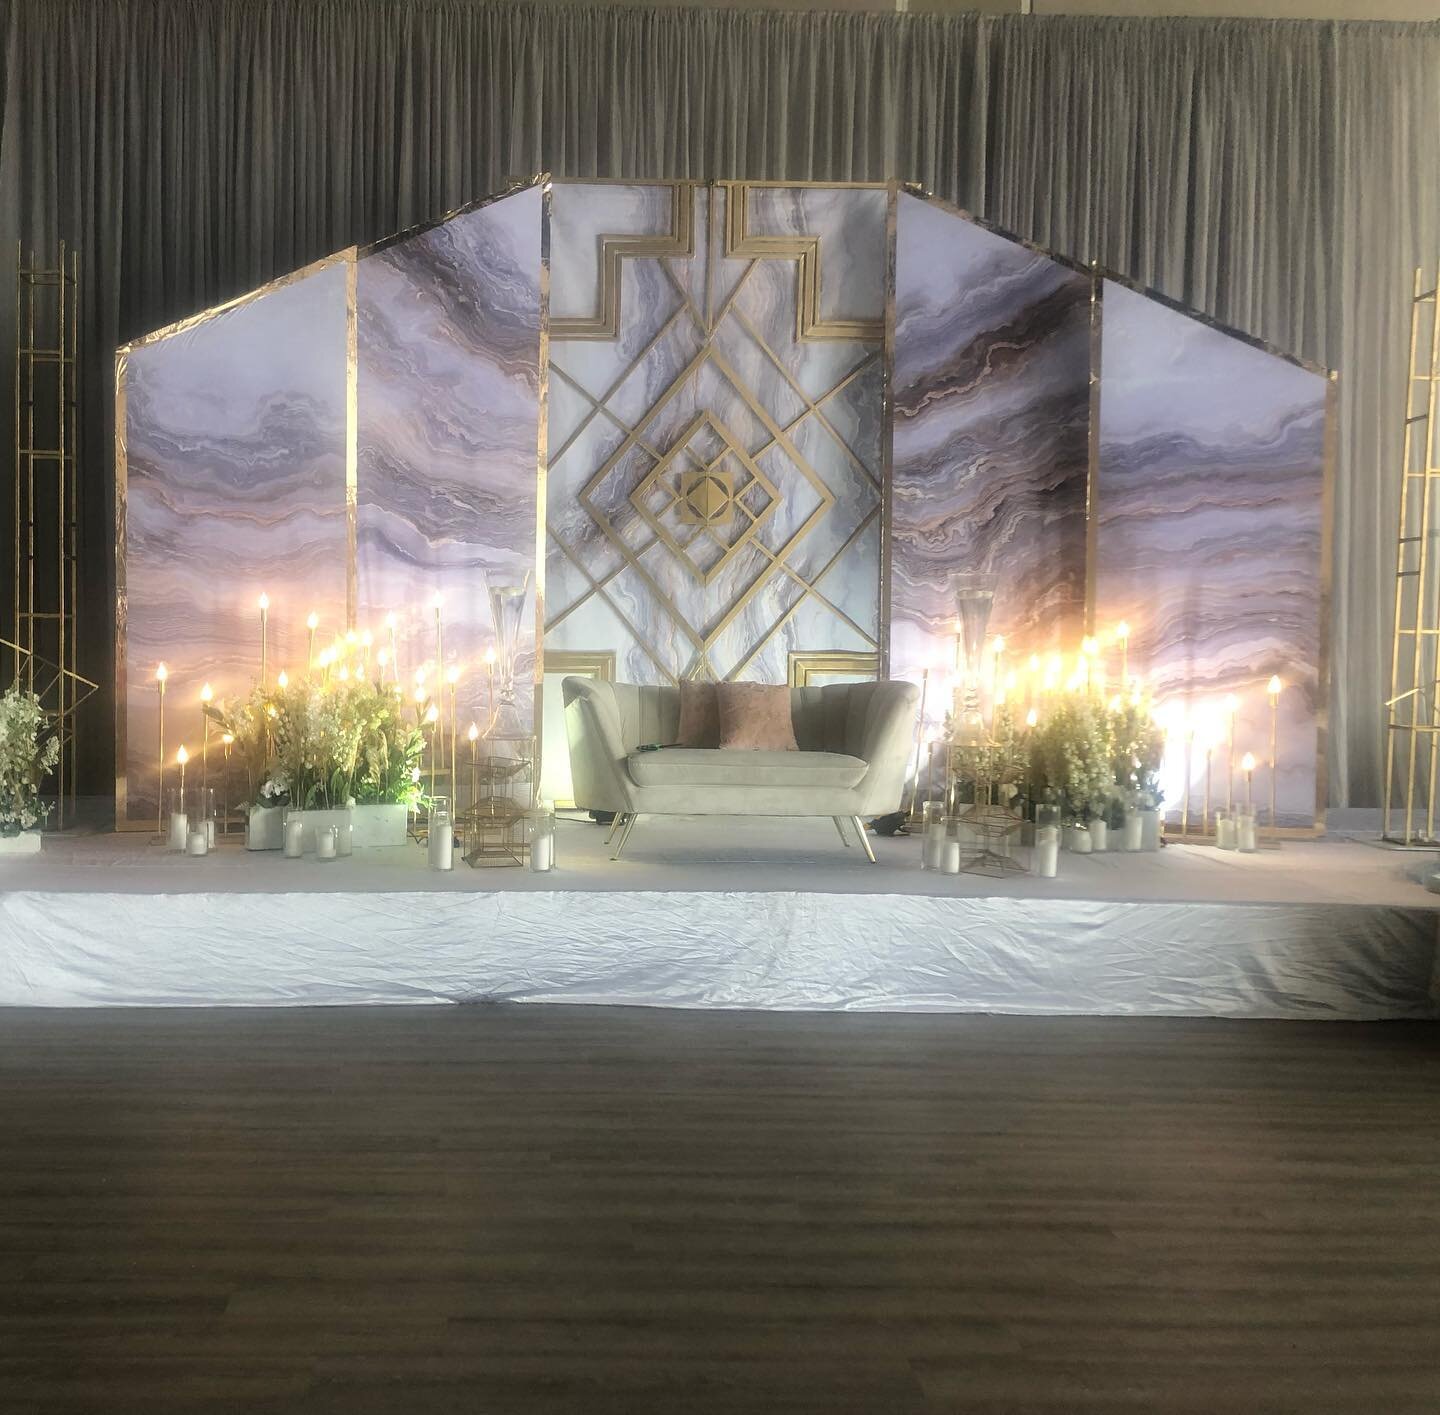 Getting ready for our Wedding Reception. A special Thank You to @starzzdesignanddecor for creating a Beautiful Classy Stage. Come by and Tour our Brand New Venue for any of your upcoming Events! Dates still available for 2021. Booking quickly for 202